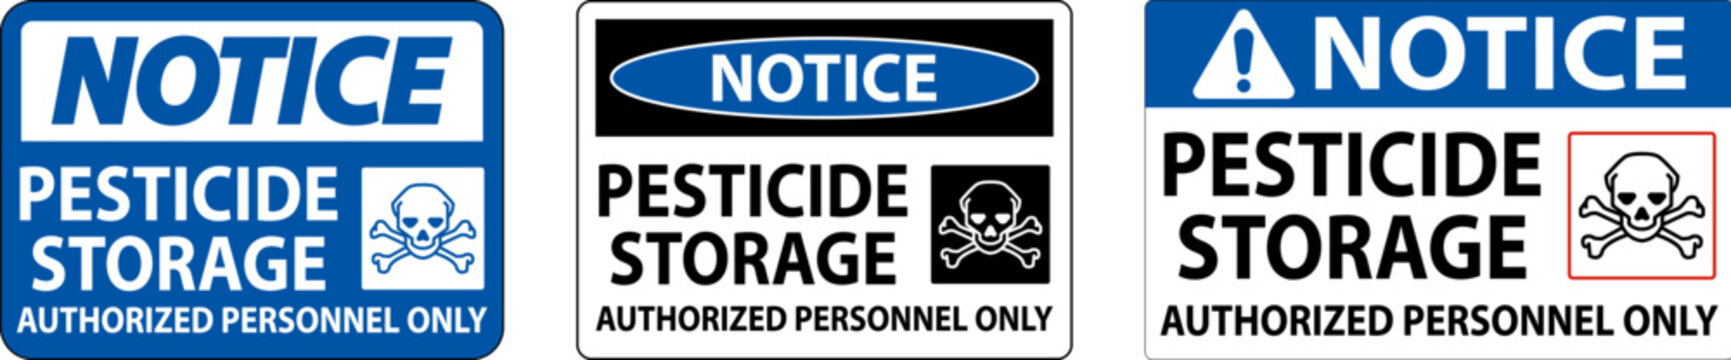 Notice Pesticide Storage Authorized Only Sign On White Background